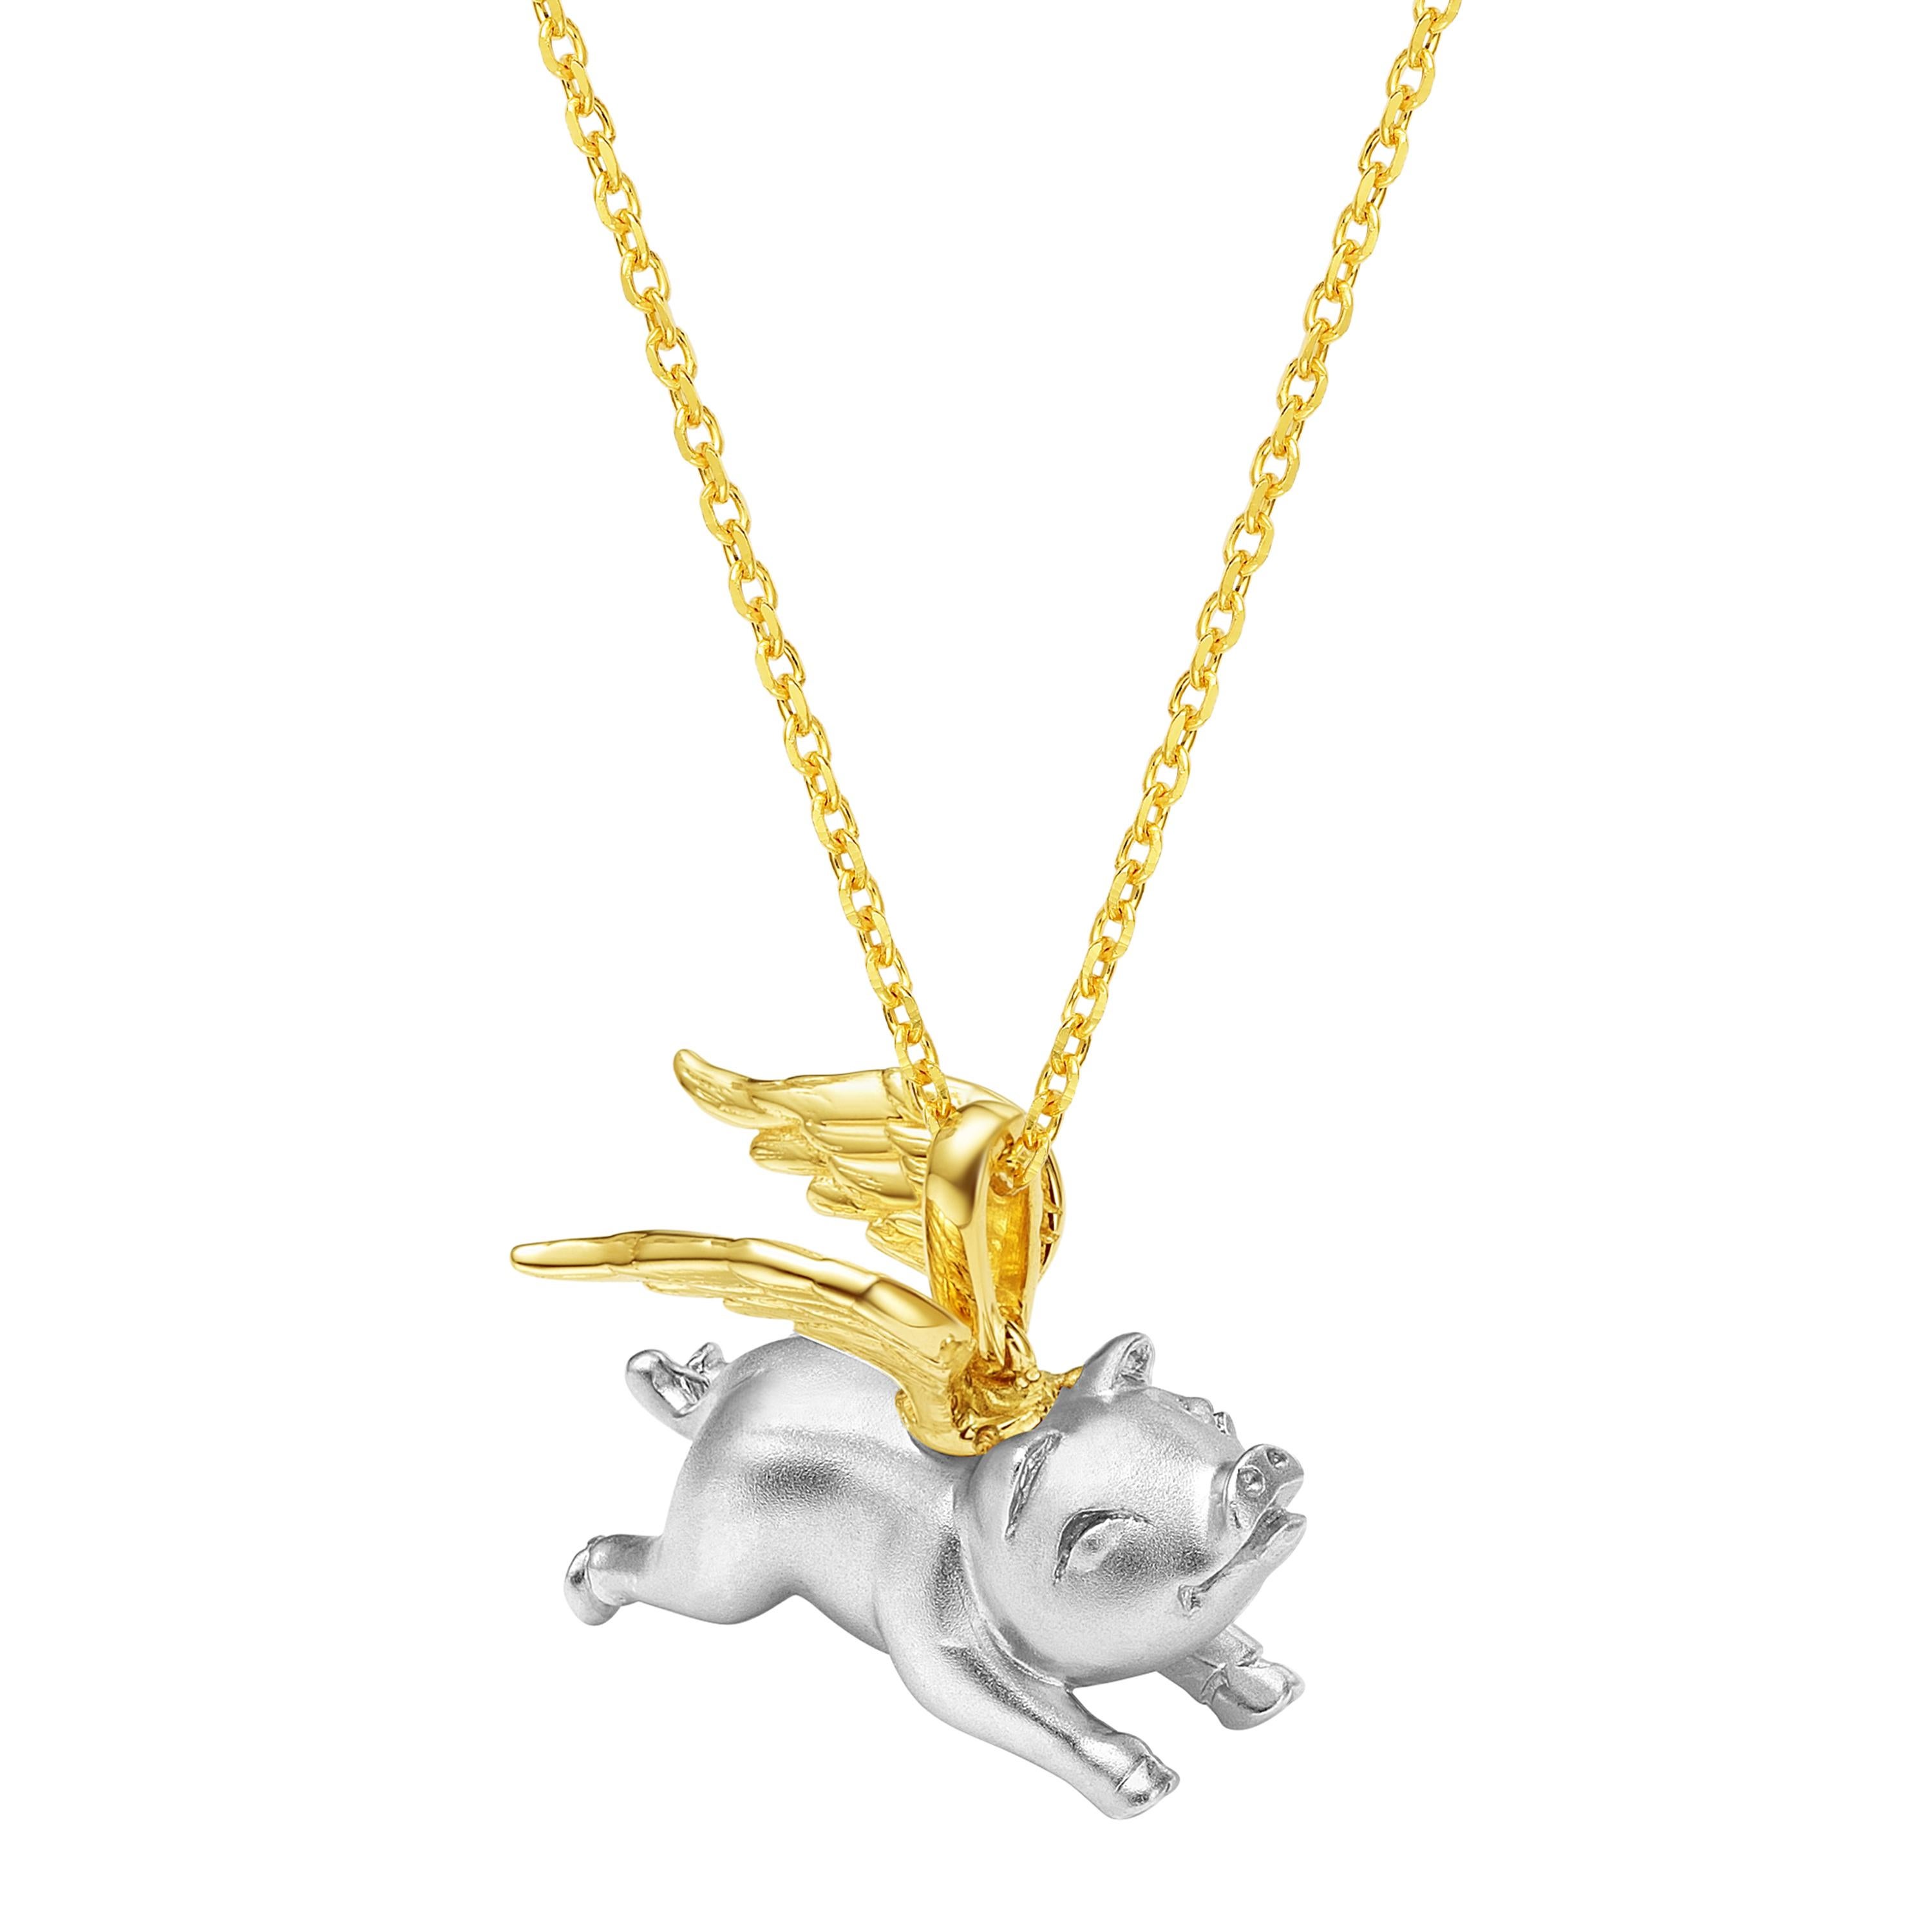 Description:
Pig pendant and bracelet with a hand-carved solid silver pig and yellow gold plated fluttering wings. It comes packaged with a 16 inches + 2 inch extension 14k yellow gold plated sterling silver chain and a 7 inch red cord, for the